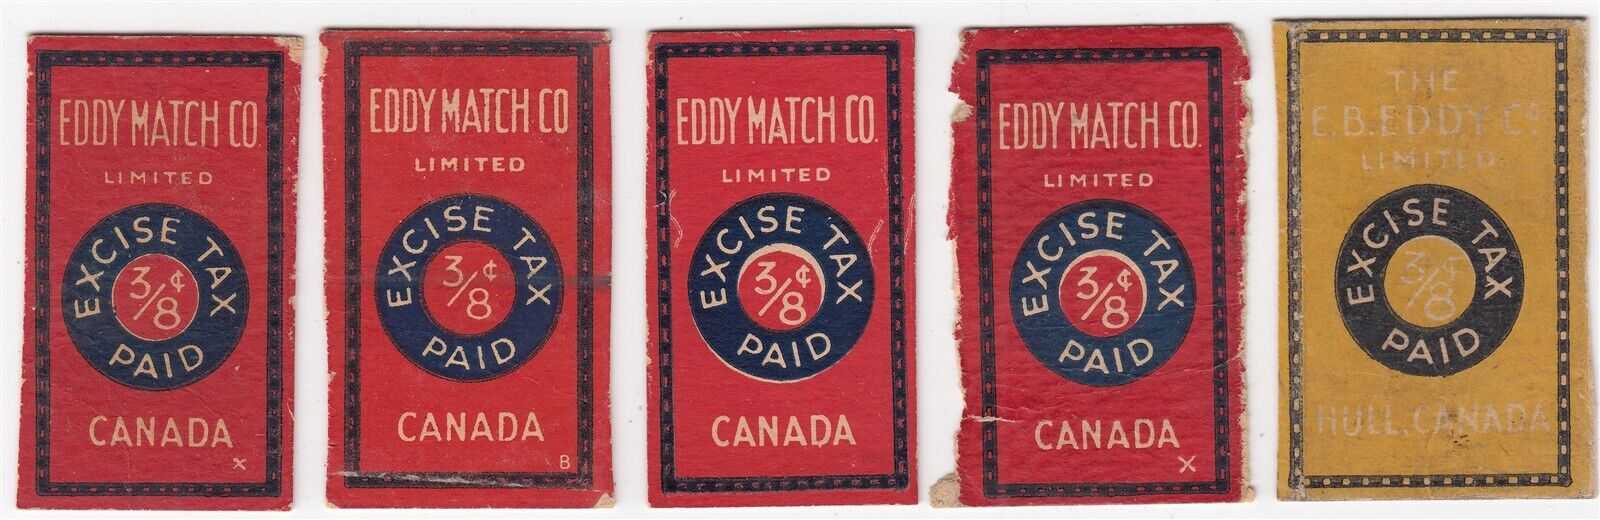 Canada Revenue 3/8¢ Excise Tax Matchbox Fronts \